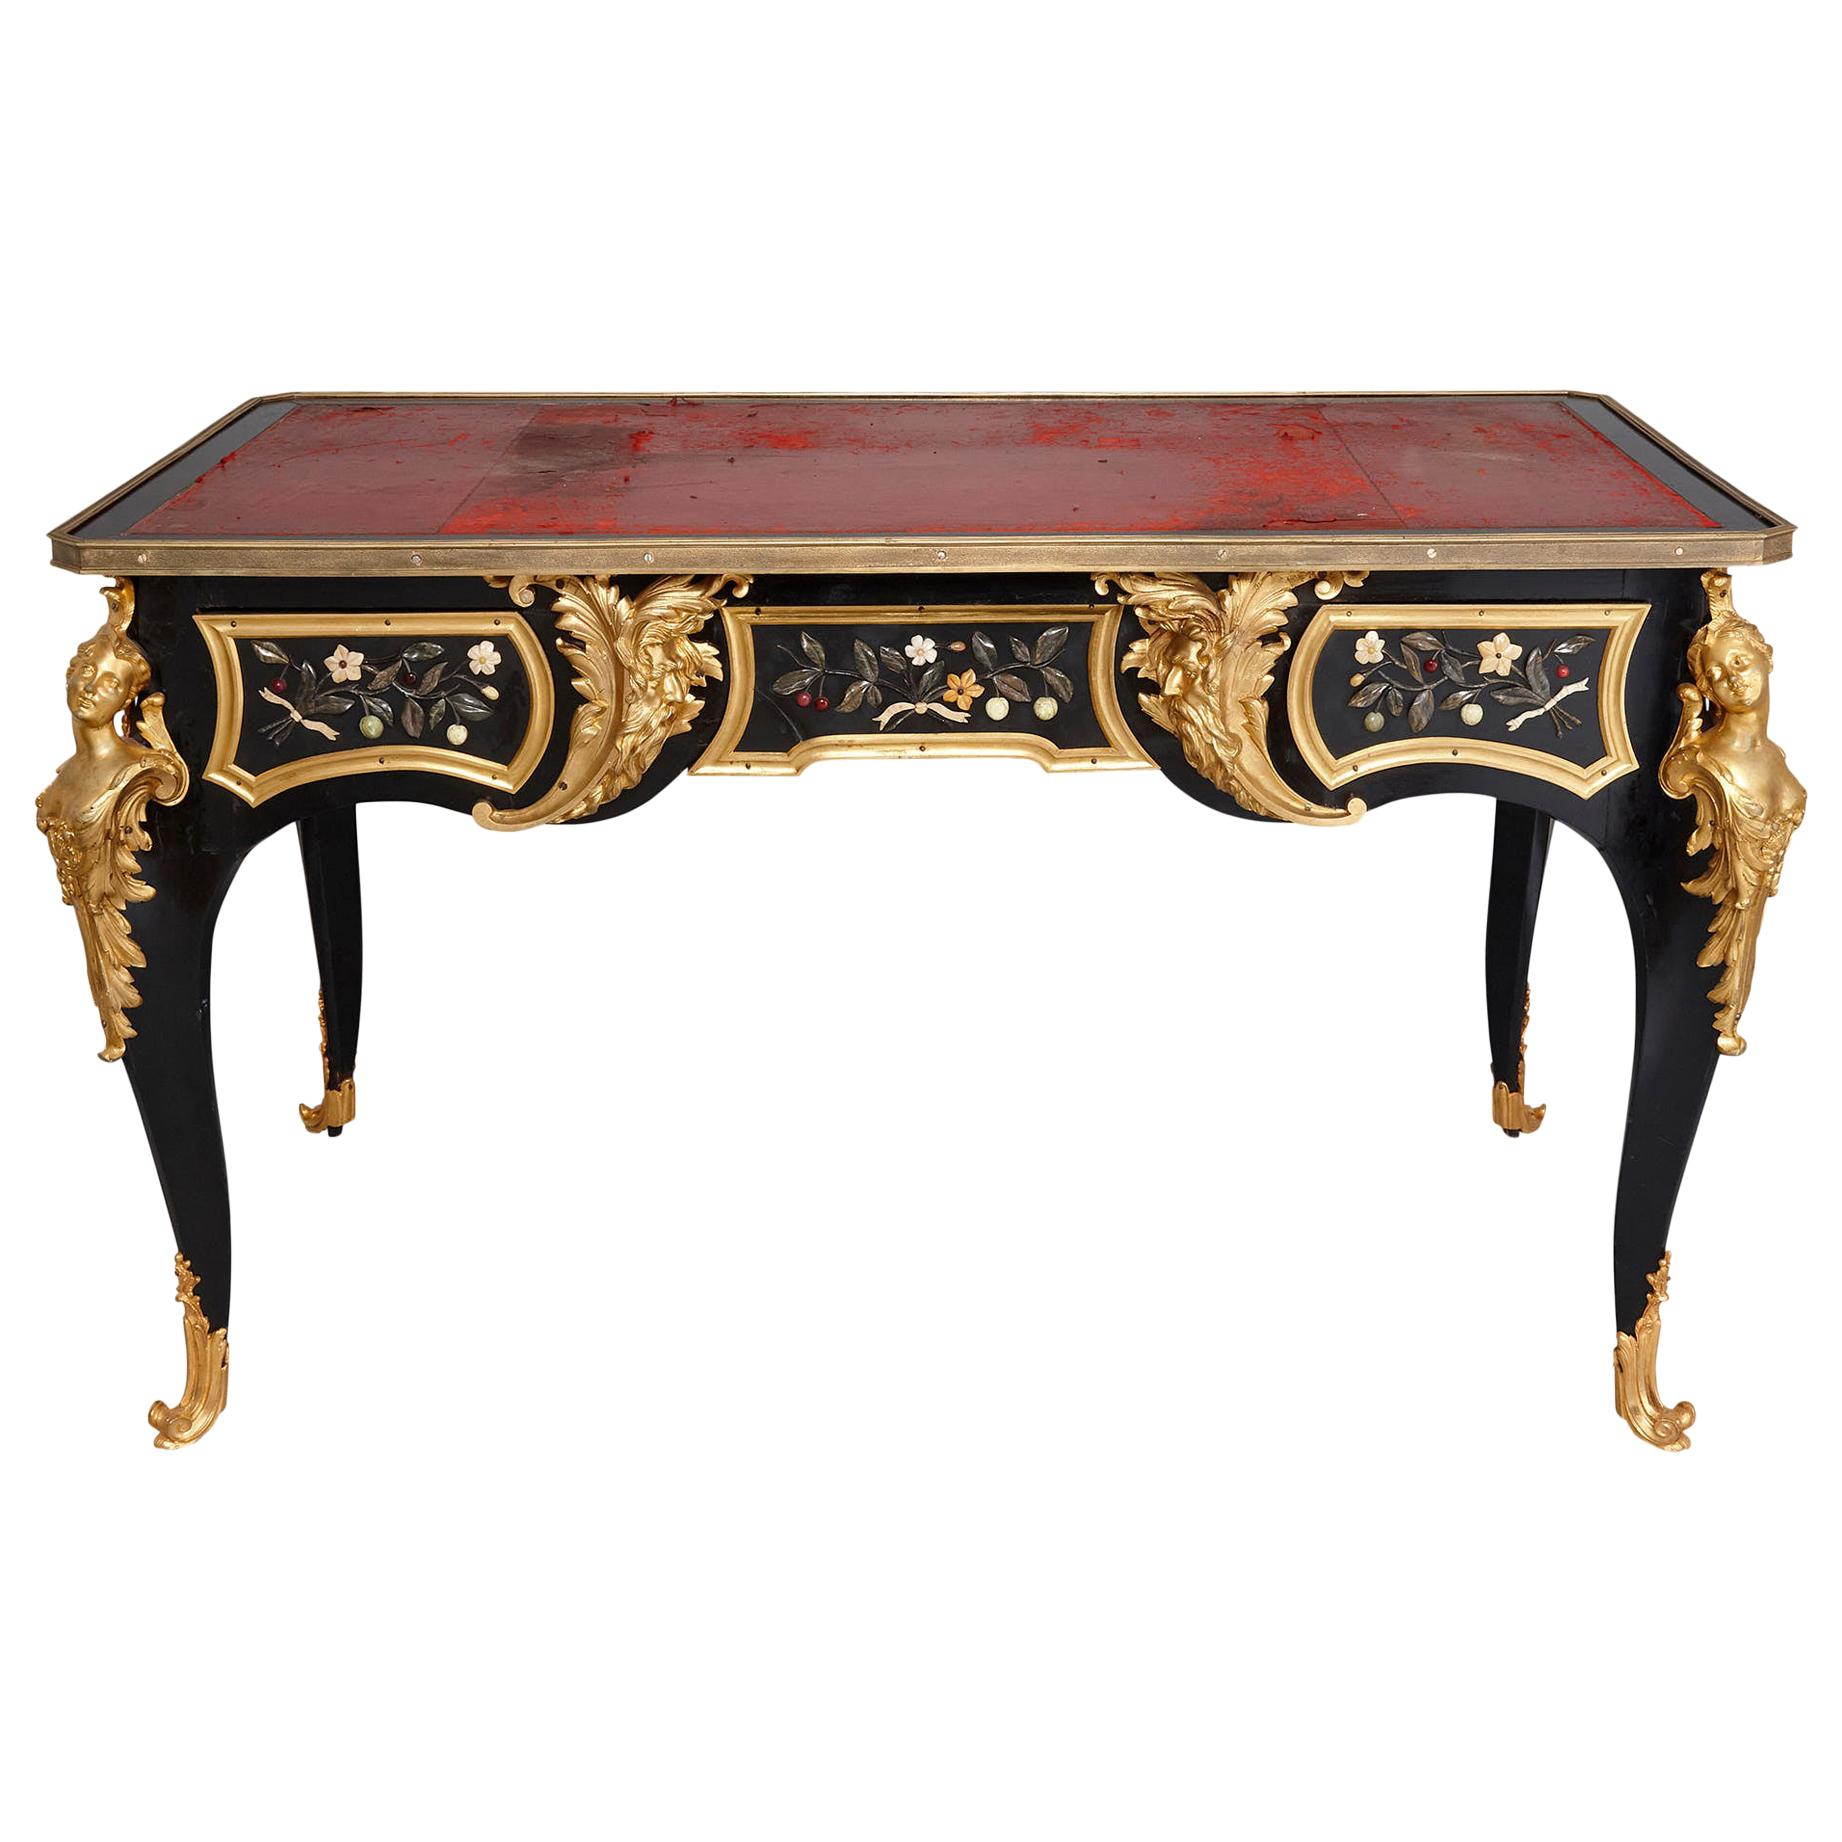 Antique Mid-19th Century Ebonised Wood, Gilt Bronze and Pietra Dura Desk For Sale